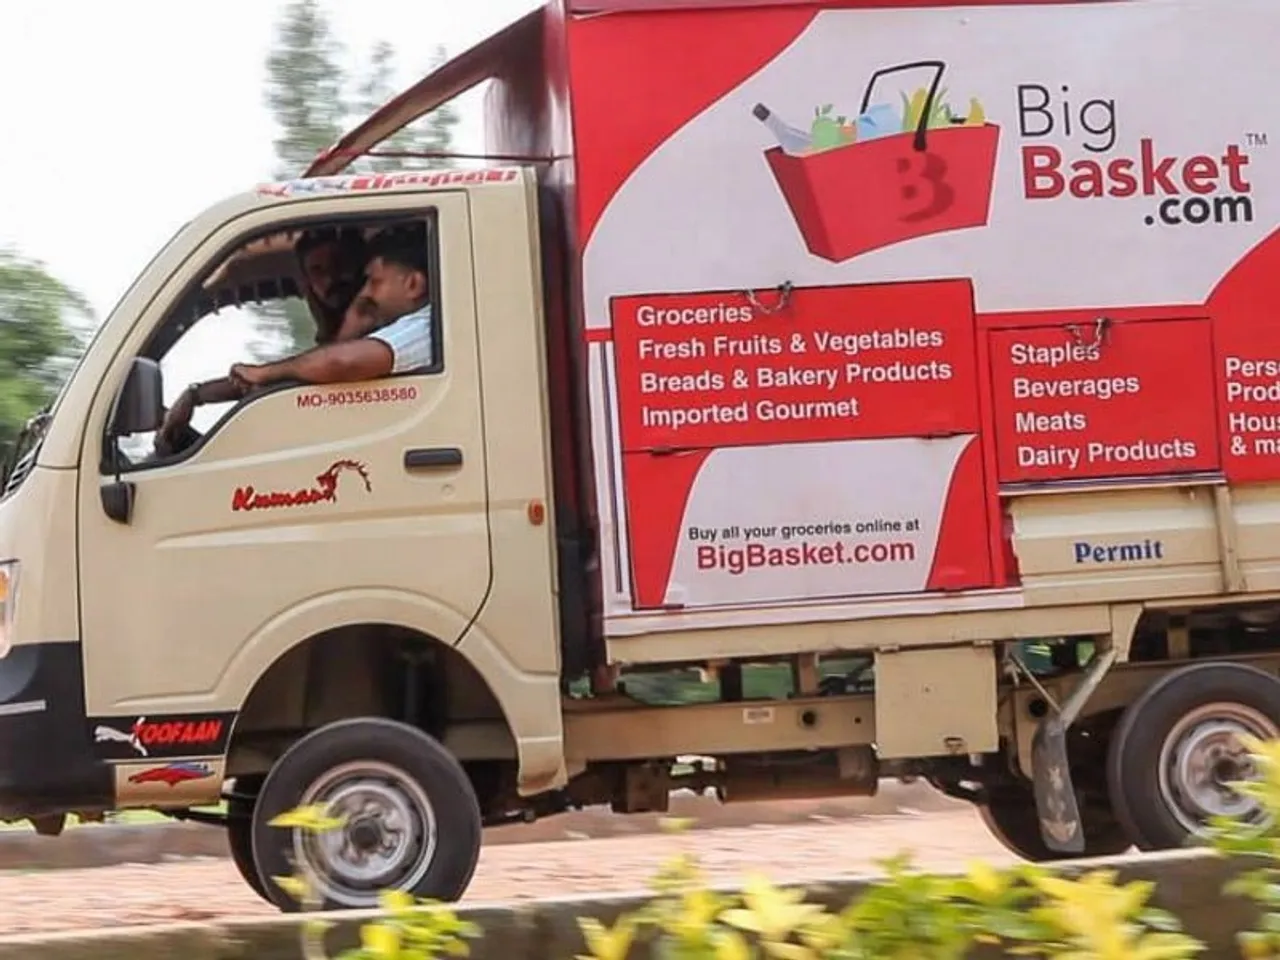 BigBasket secures $196M funding in a round led by Alibaba